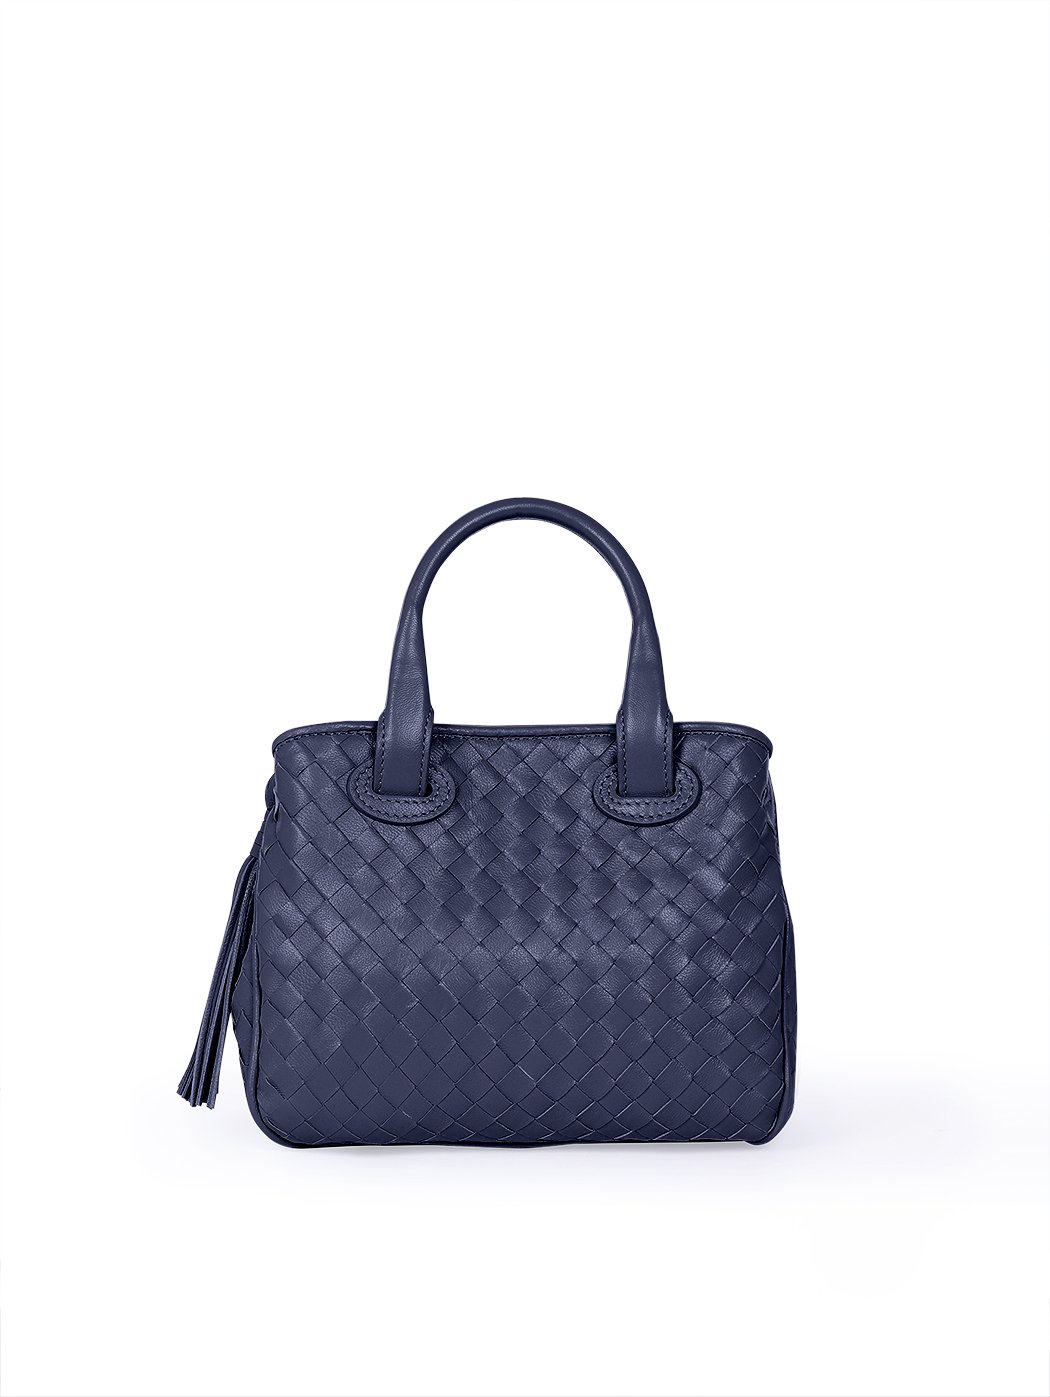 Navy Blue and Printed Smooth Leather with Sodalite Shoulder Bag |  DidemSlowMadeLeather